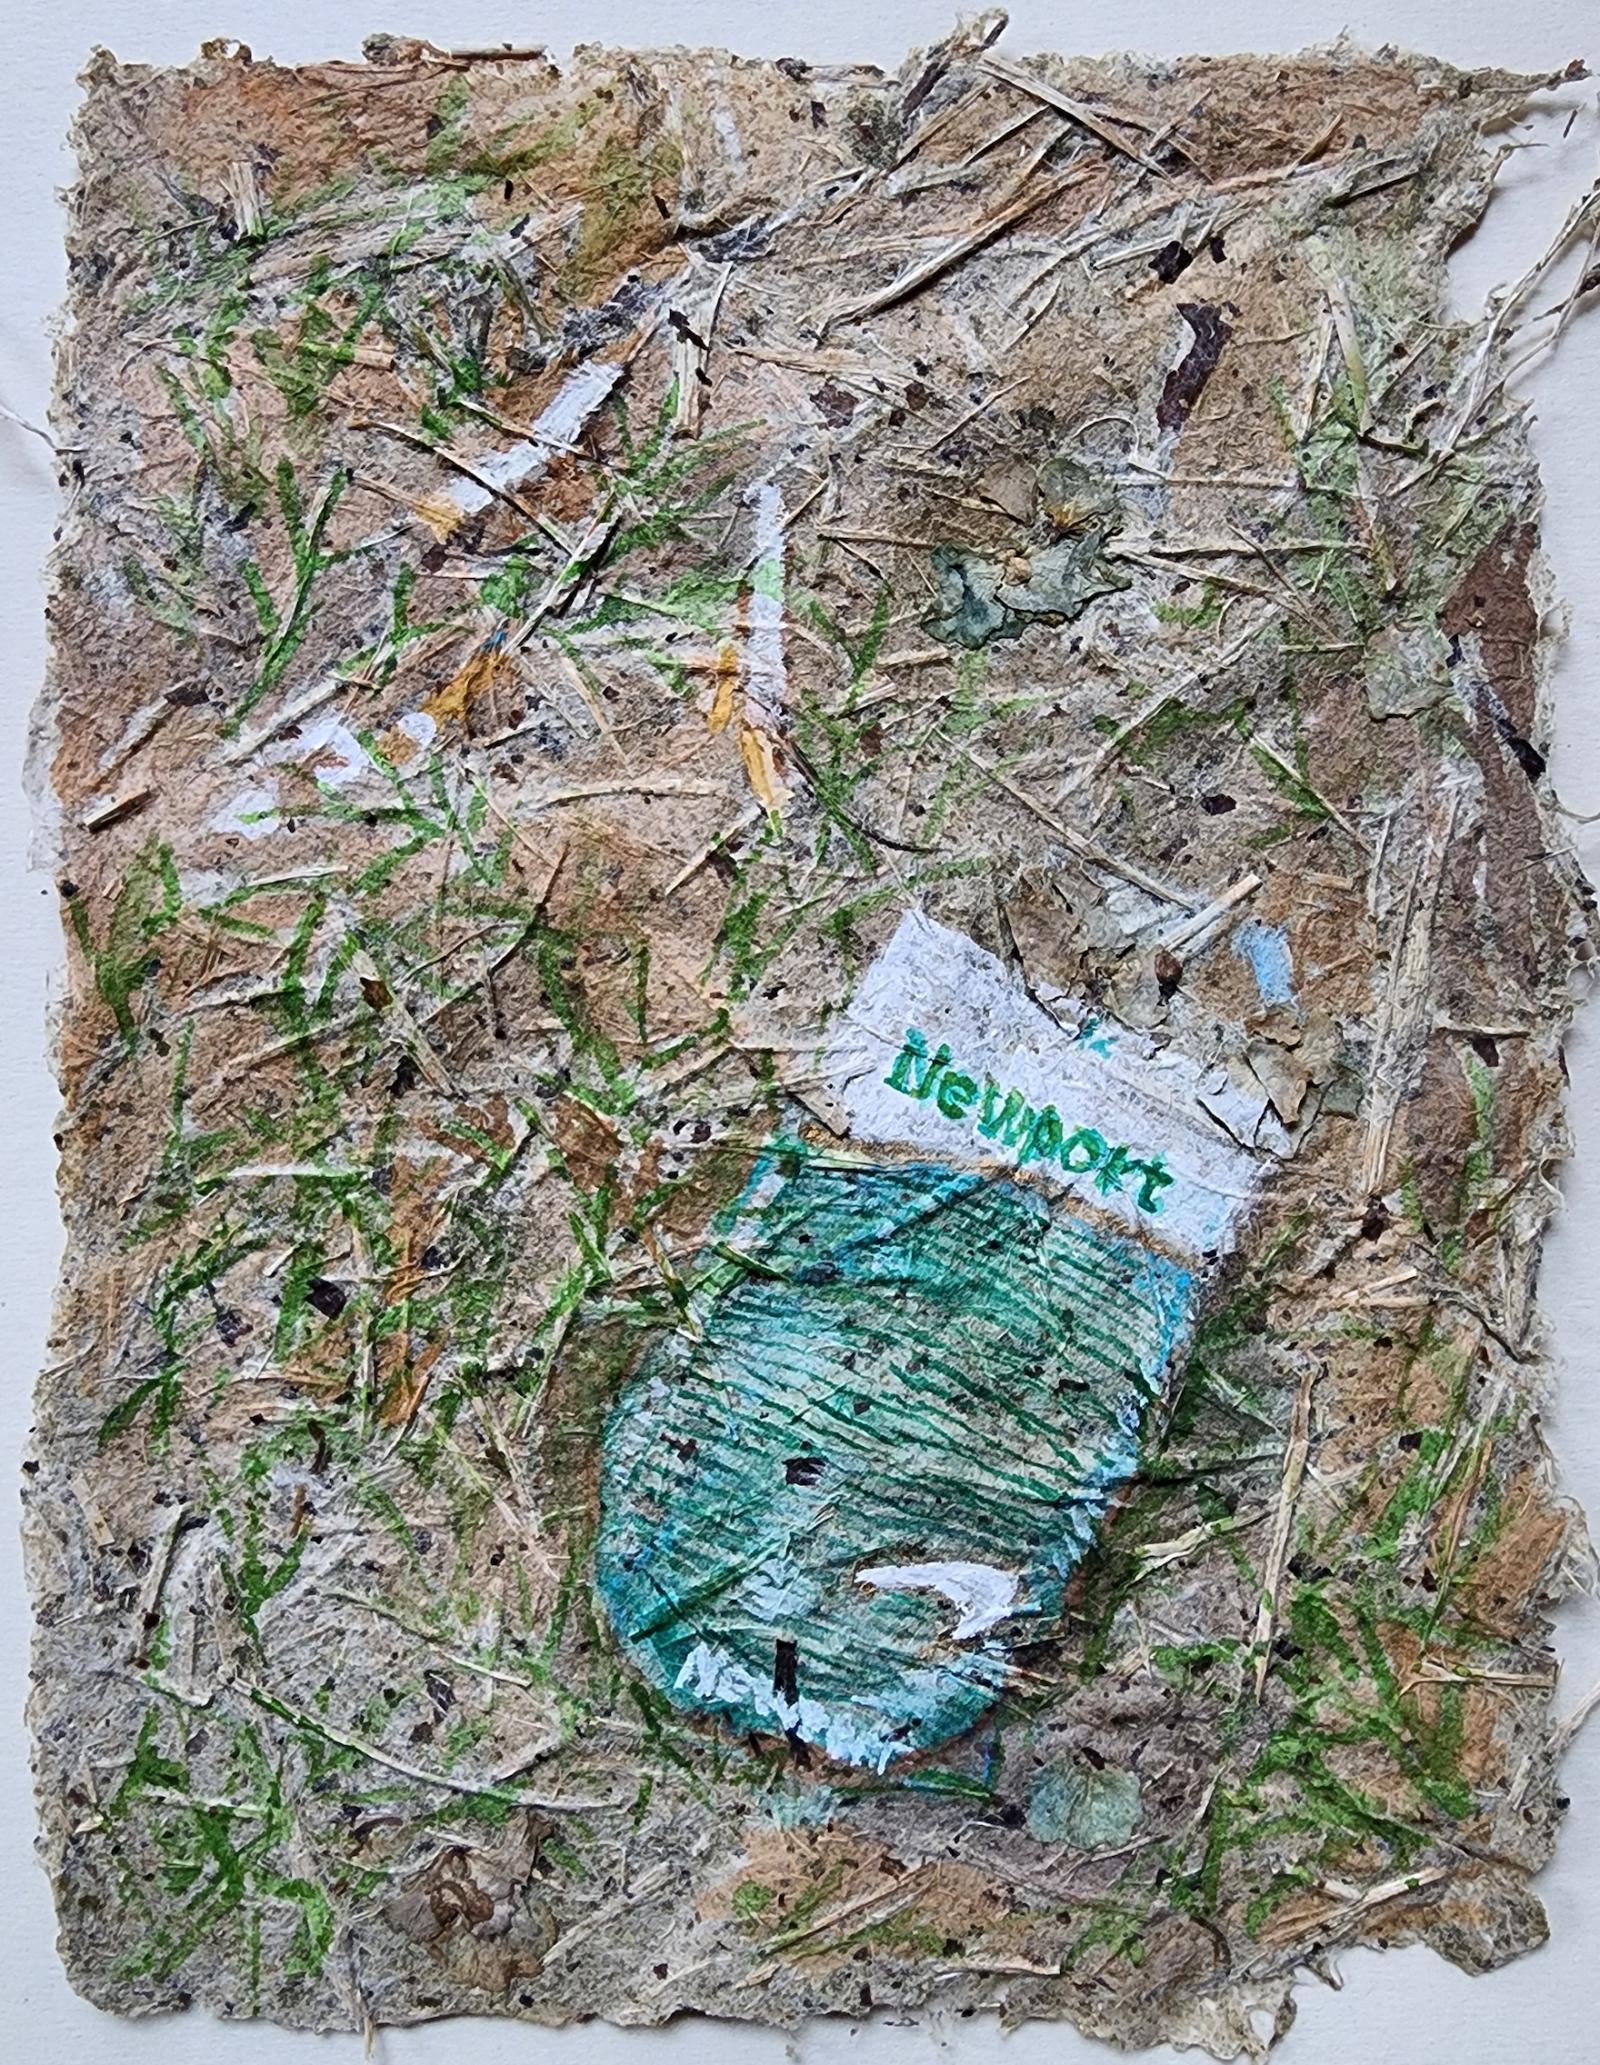 A painting of a pack of Newports with three cigarettes. This is one of a series of paintings of a pack of Newports and three "loosies"— though these were likely dropped and were not for sale. Empty packs of Newports can be found all over downtown Baltimore and have almost become an icon of Baltimore. In this painting, I allowed the texture of the paper to come through strongly, making the pack of cigarettes and the loosies to almost disappear into the surface. 